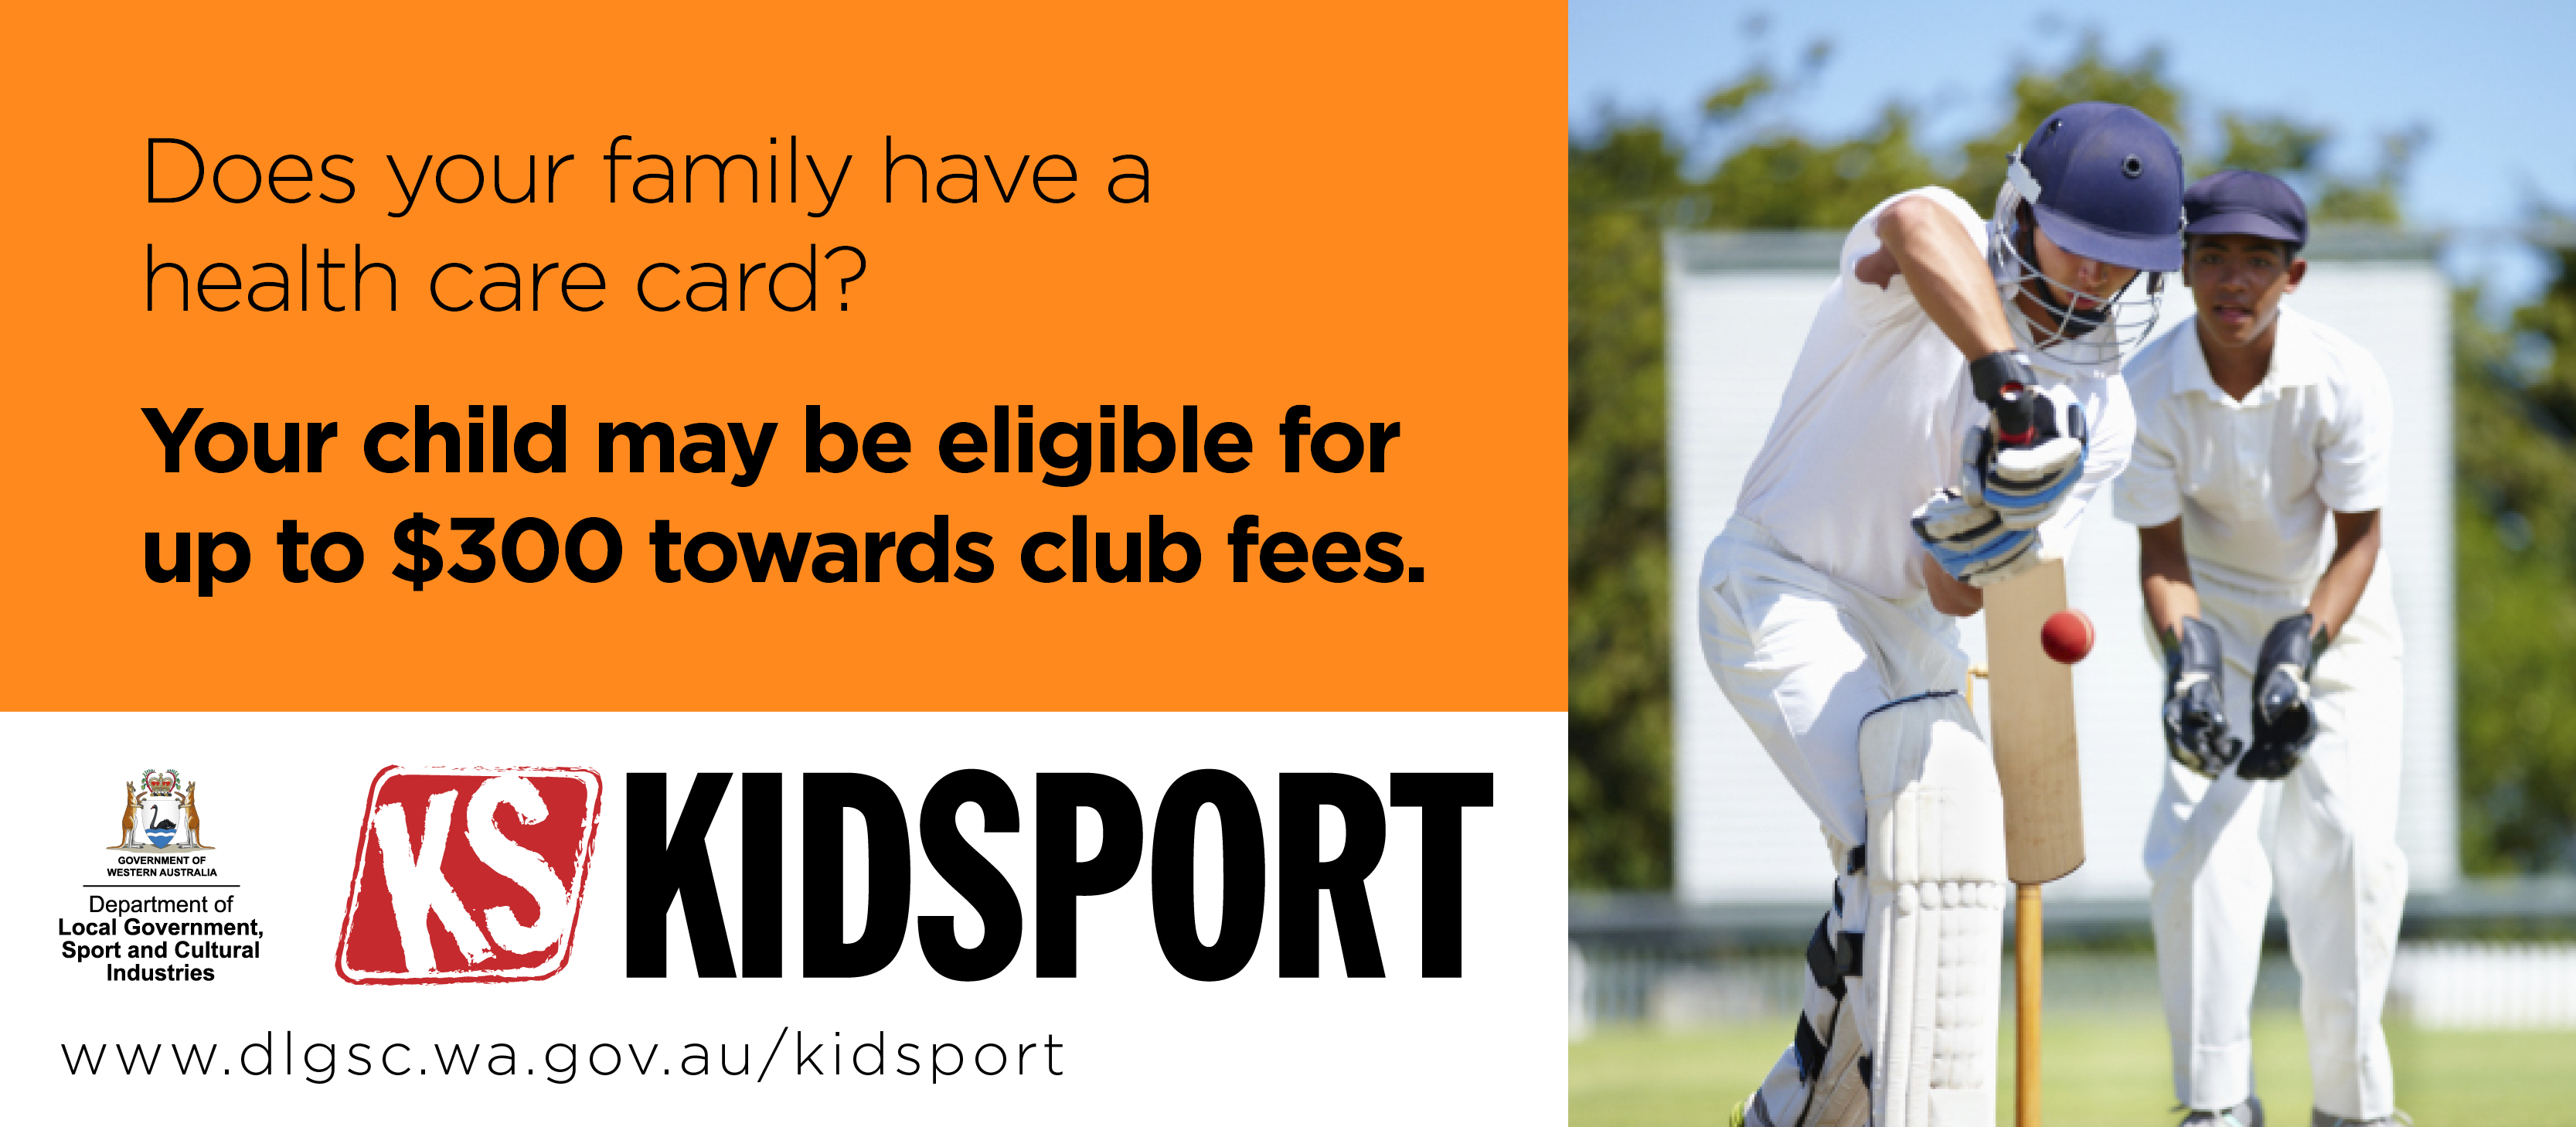 Social media tile promoting KidSport to parent and families